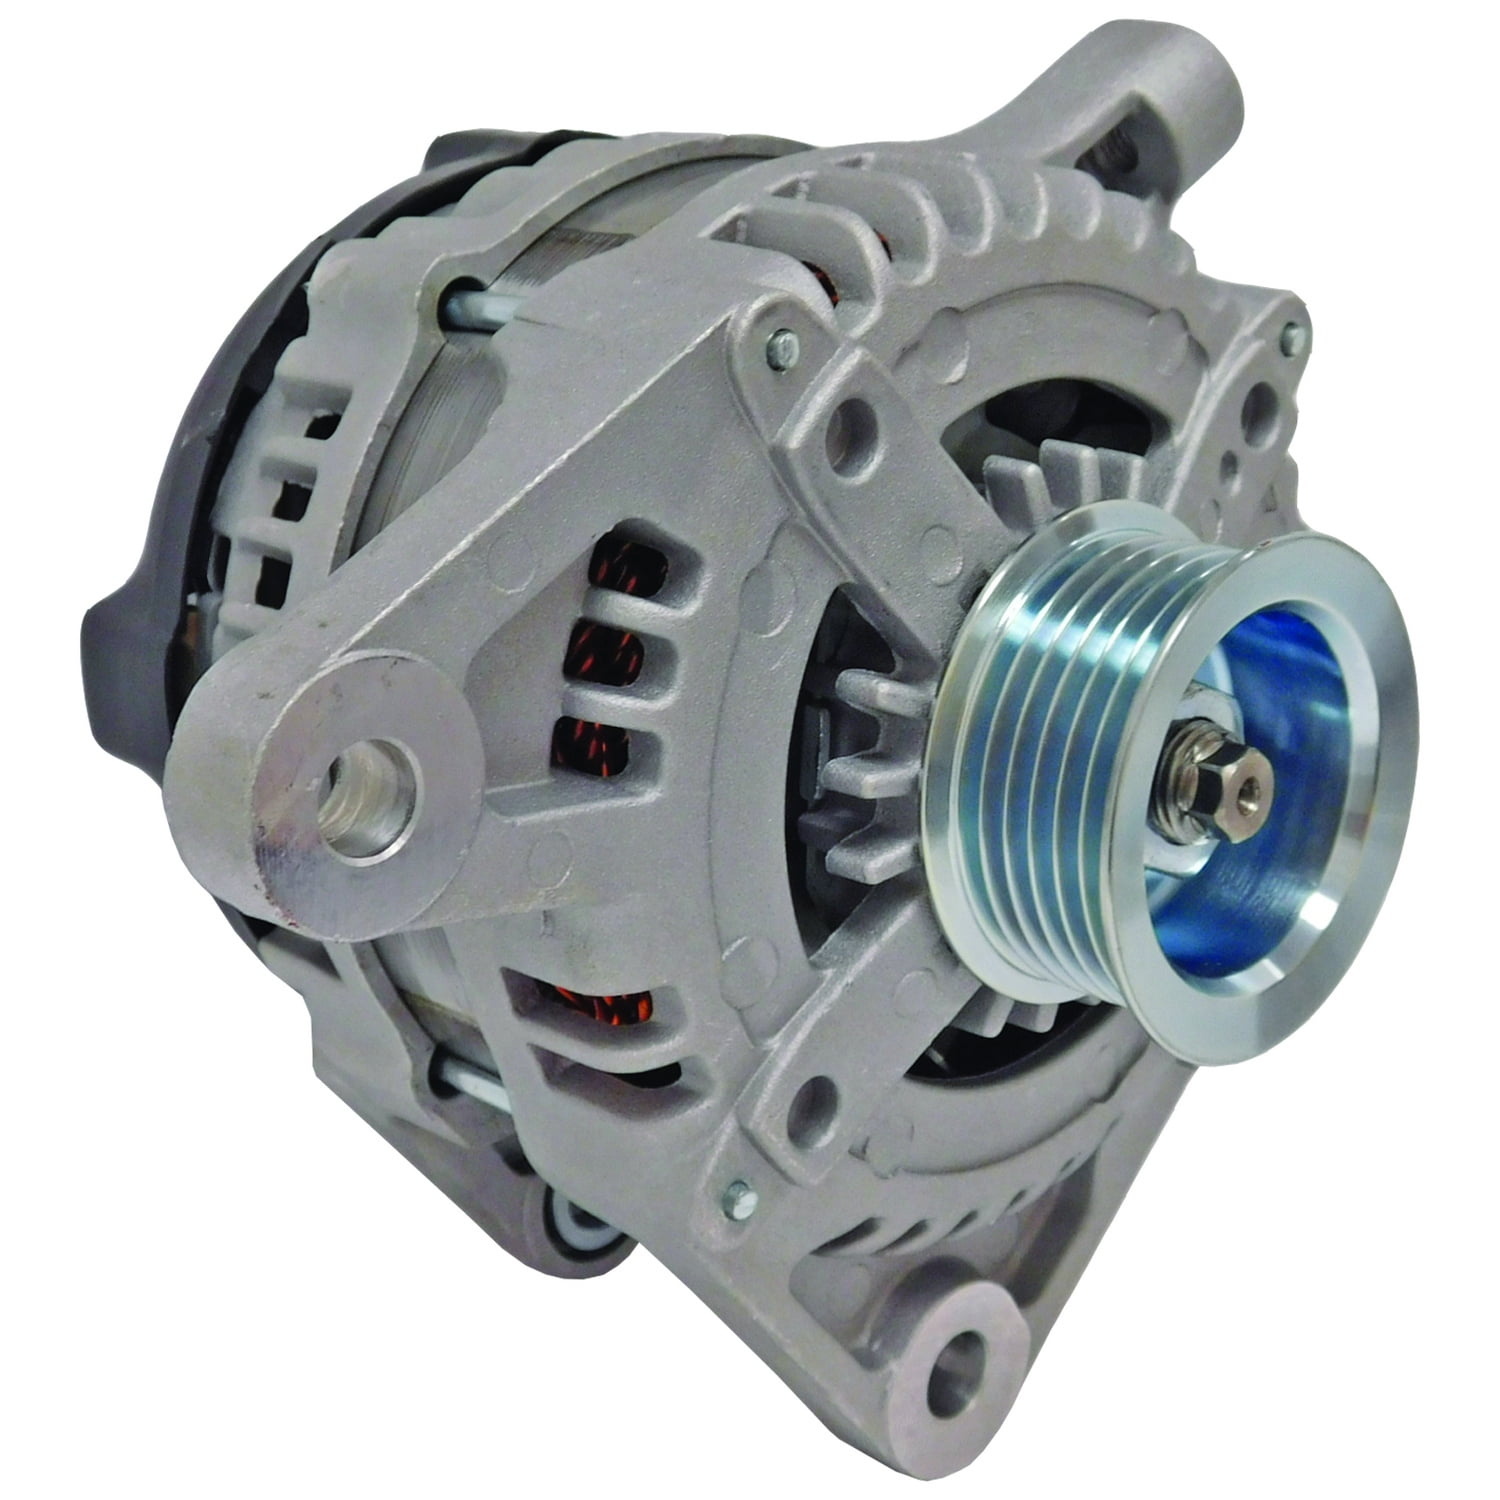 New Alternator Replacement for Jeep Wrangler V6  09-11 04727865AB  4727865AB R4727865AB 421000-0560 AND0479 12830 11294 90-29-5699 11294A  AL6477X 90-29-5699N N11294 1N8881 210-0651 11294N A-80387 